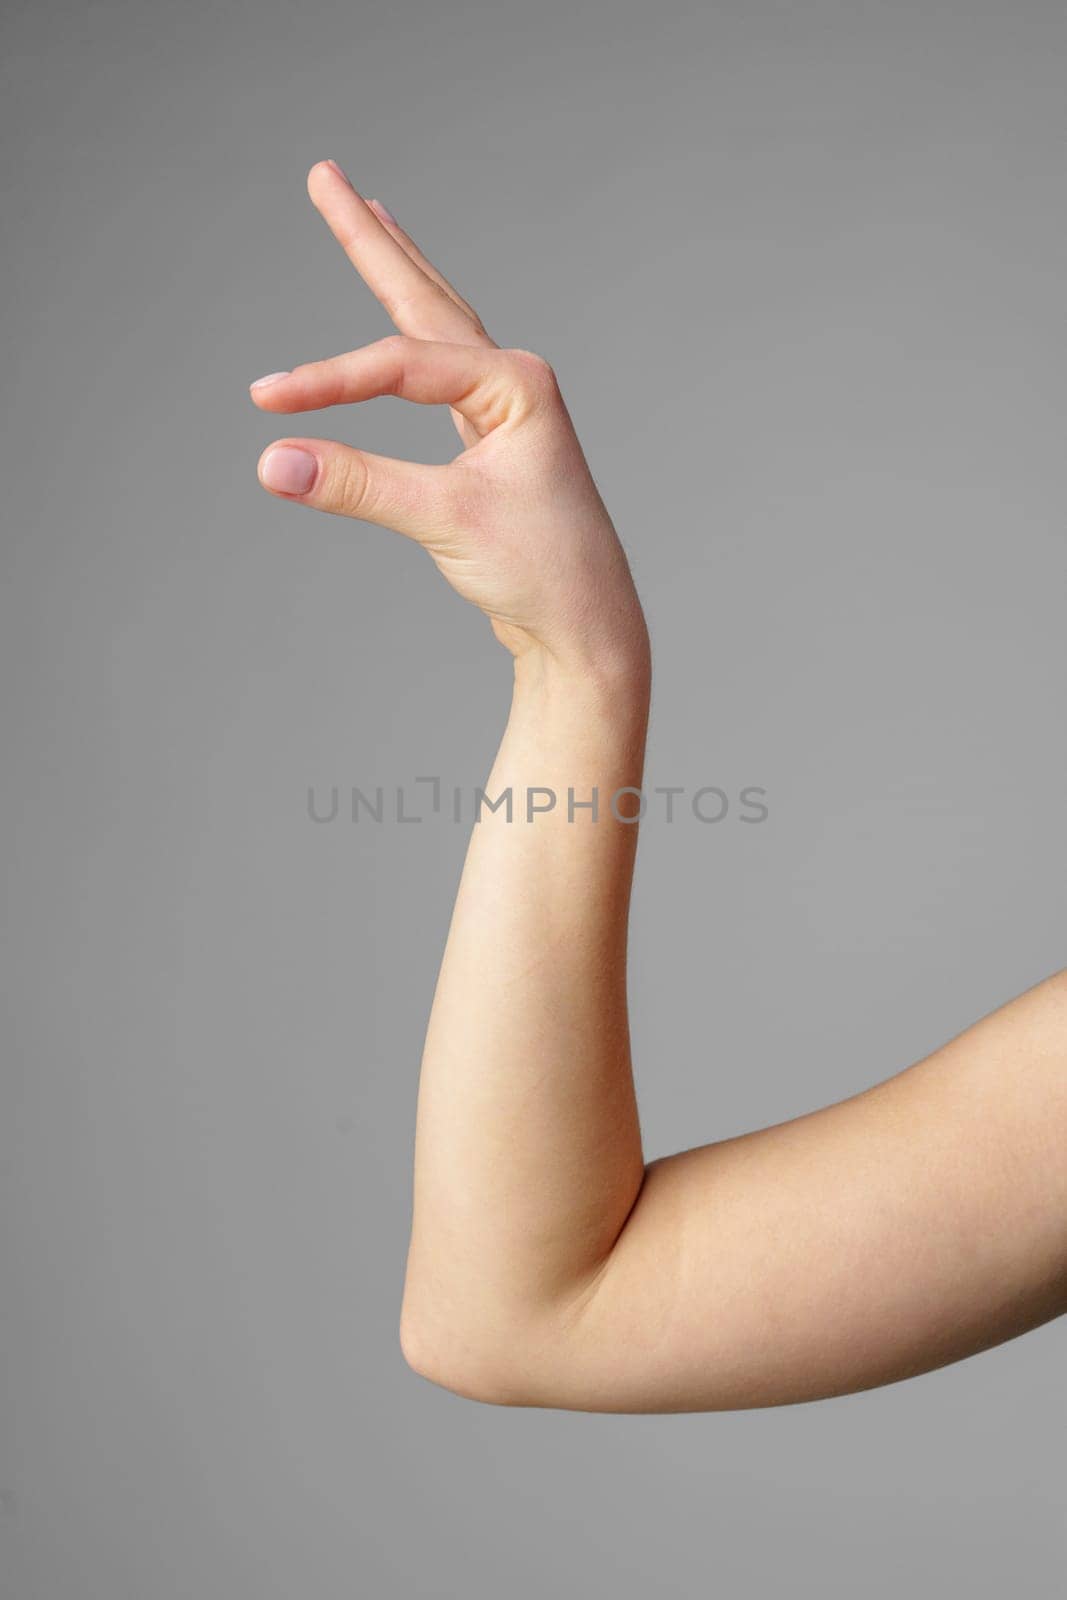 Woman Holding Arm Up in the Air with Gesture close up